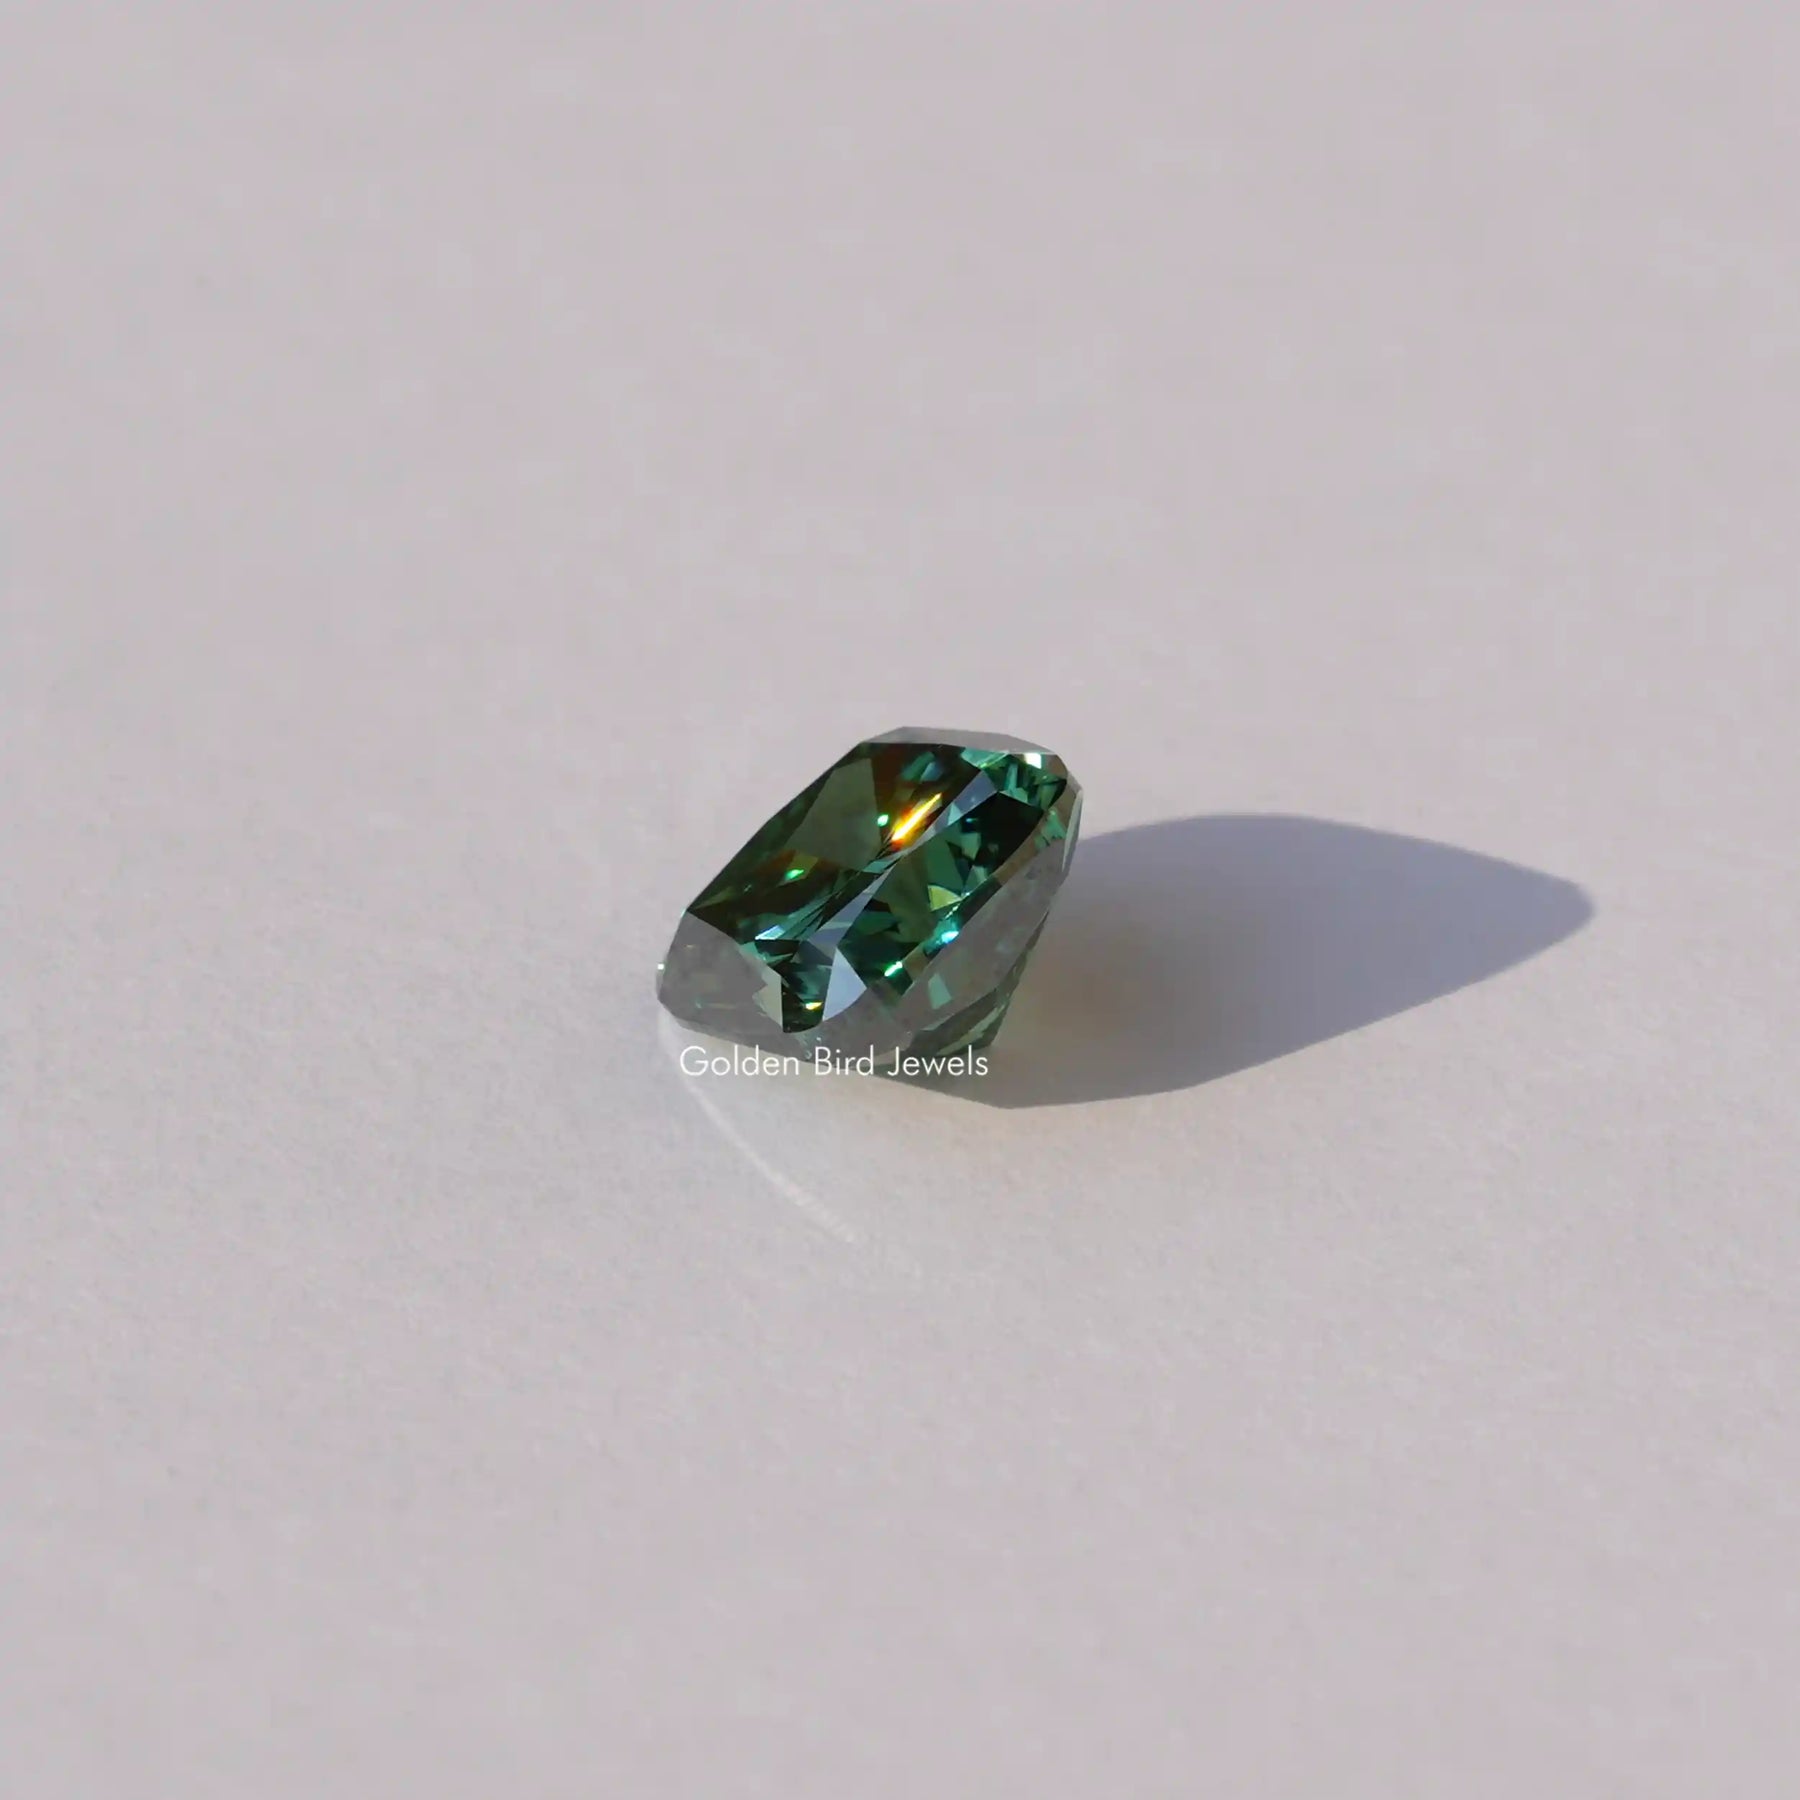 [Top view of cushion cut loose stone]-[Golden Bird Jewels]